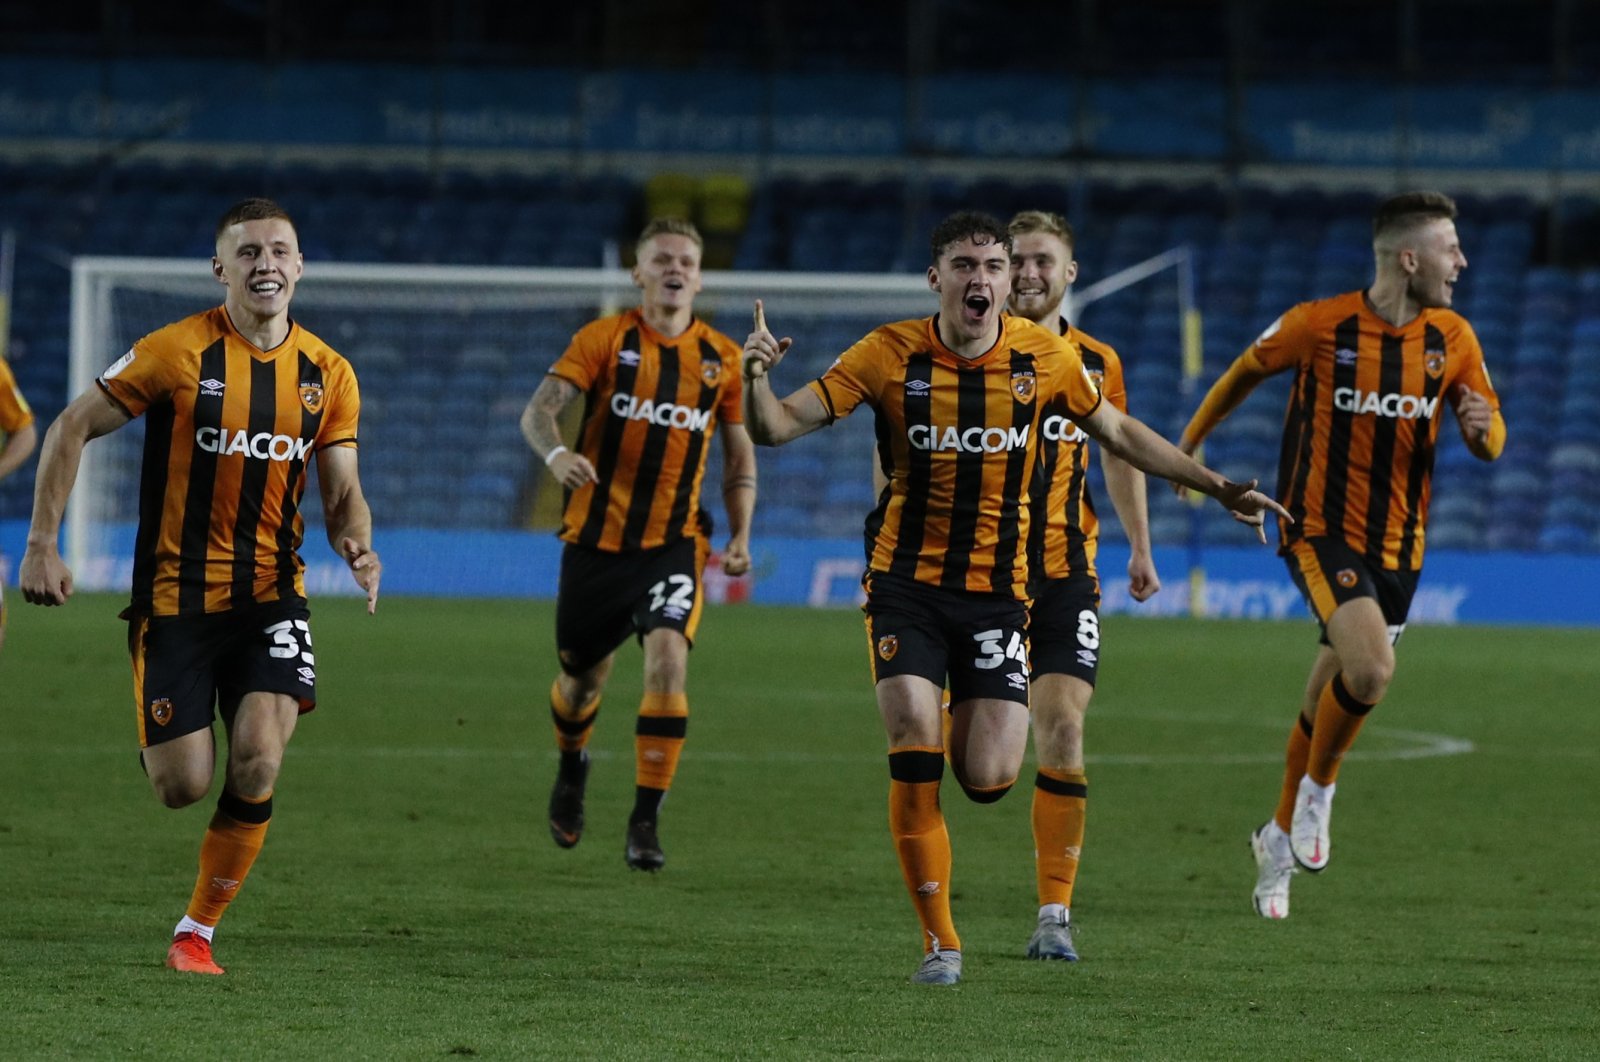 Hull City players run to celebrate after their winning penalty following the penalty shootout during an English League Cup match against Leeds United, Leeds, England, Sept. 16, 2020. (AP Photo)